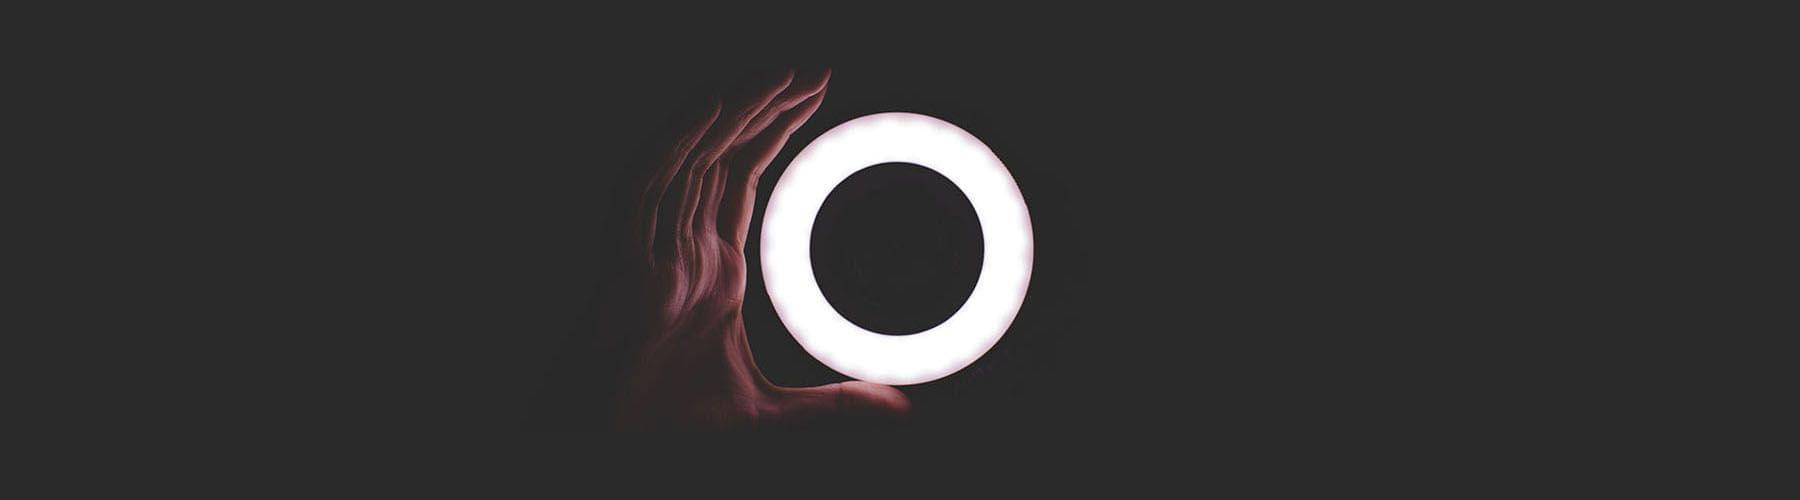 A glowing white circular light held by up by a hand in the darkness.